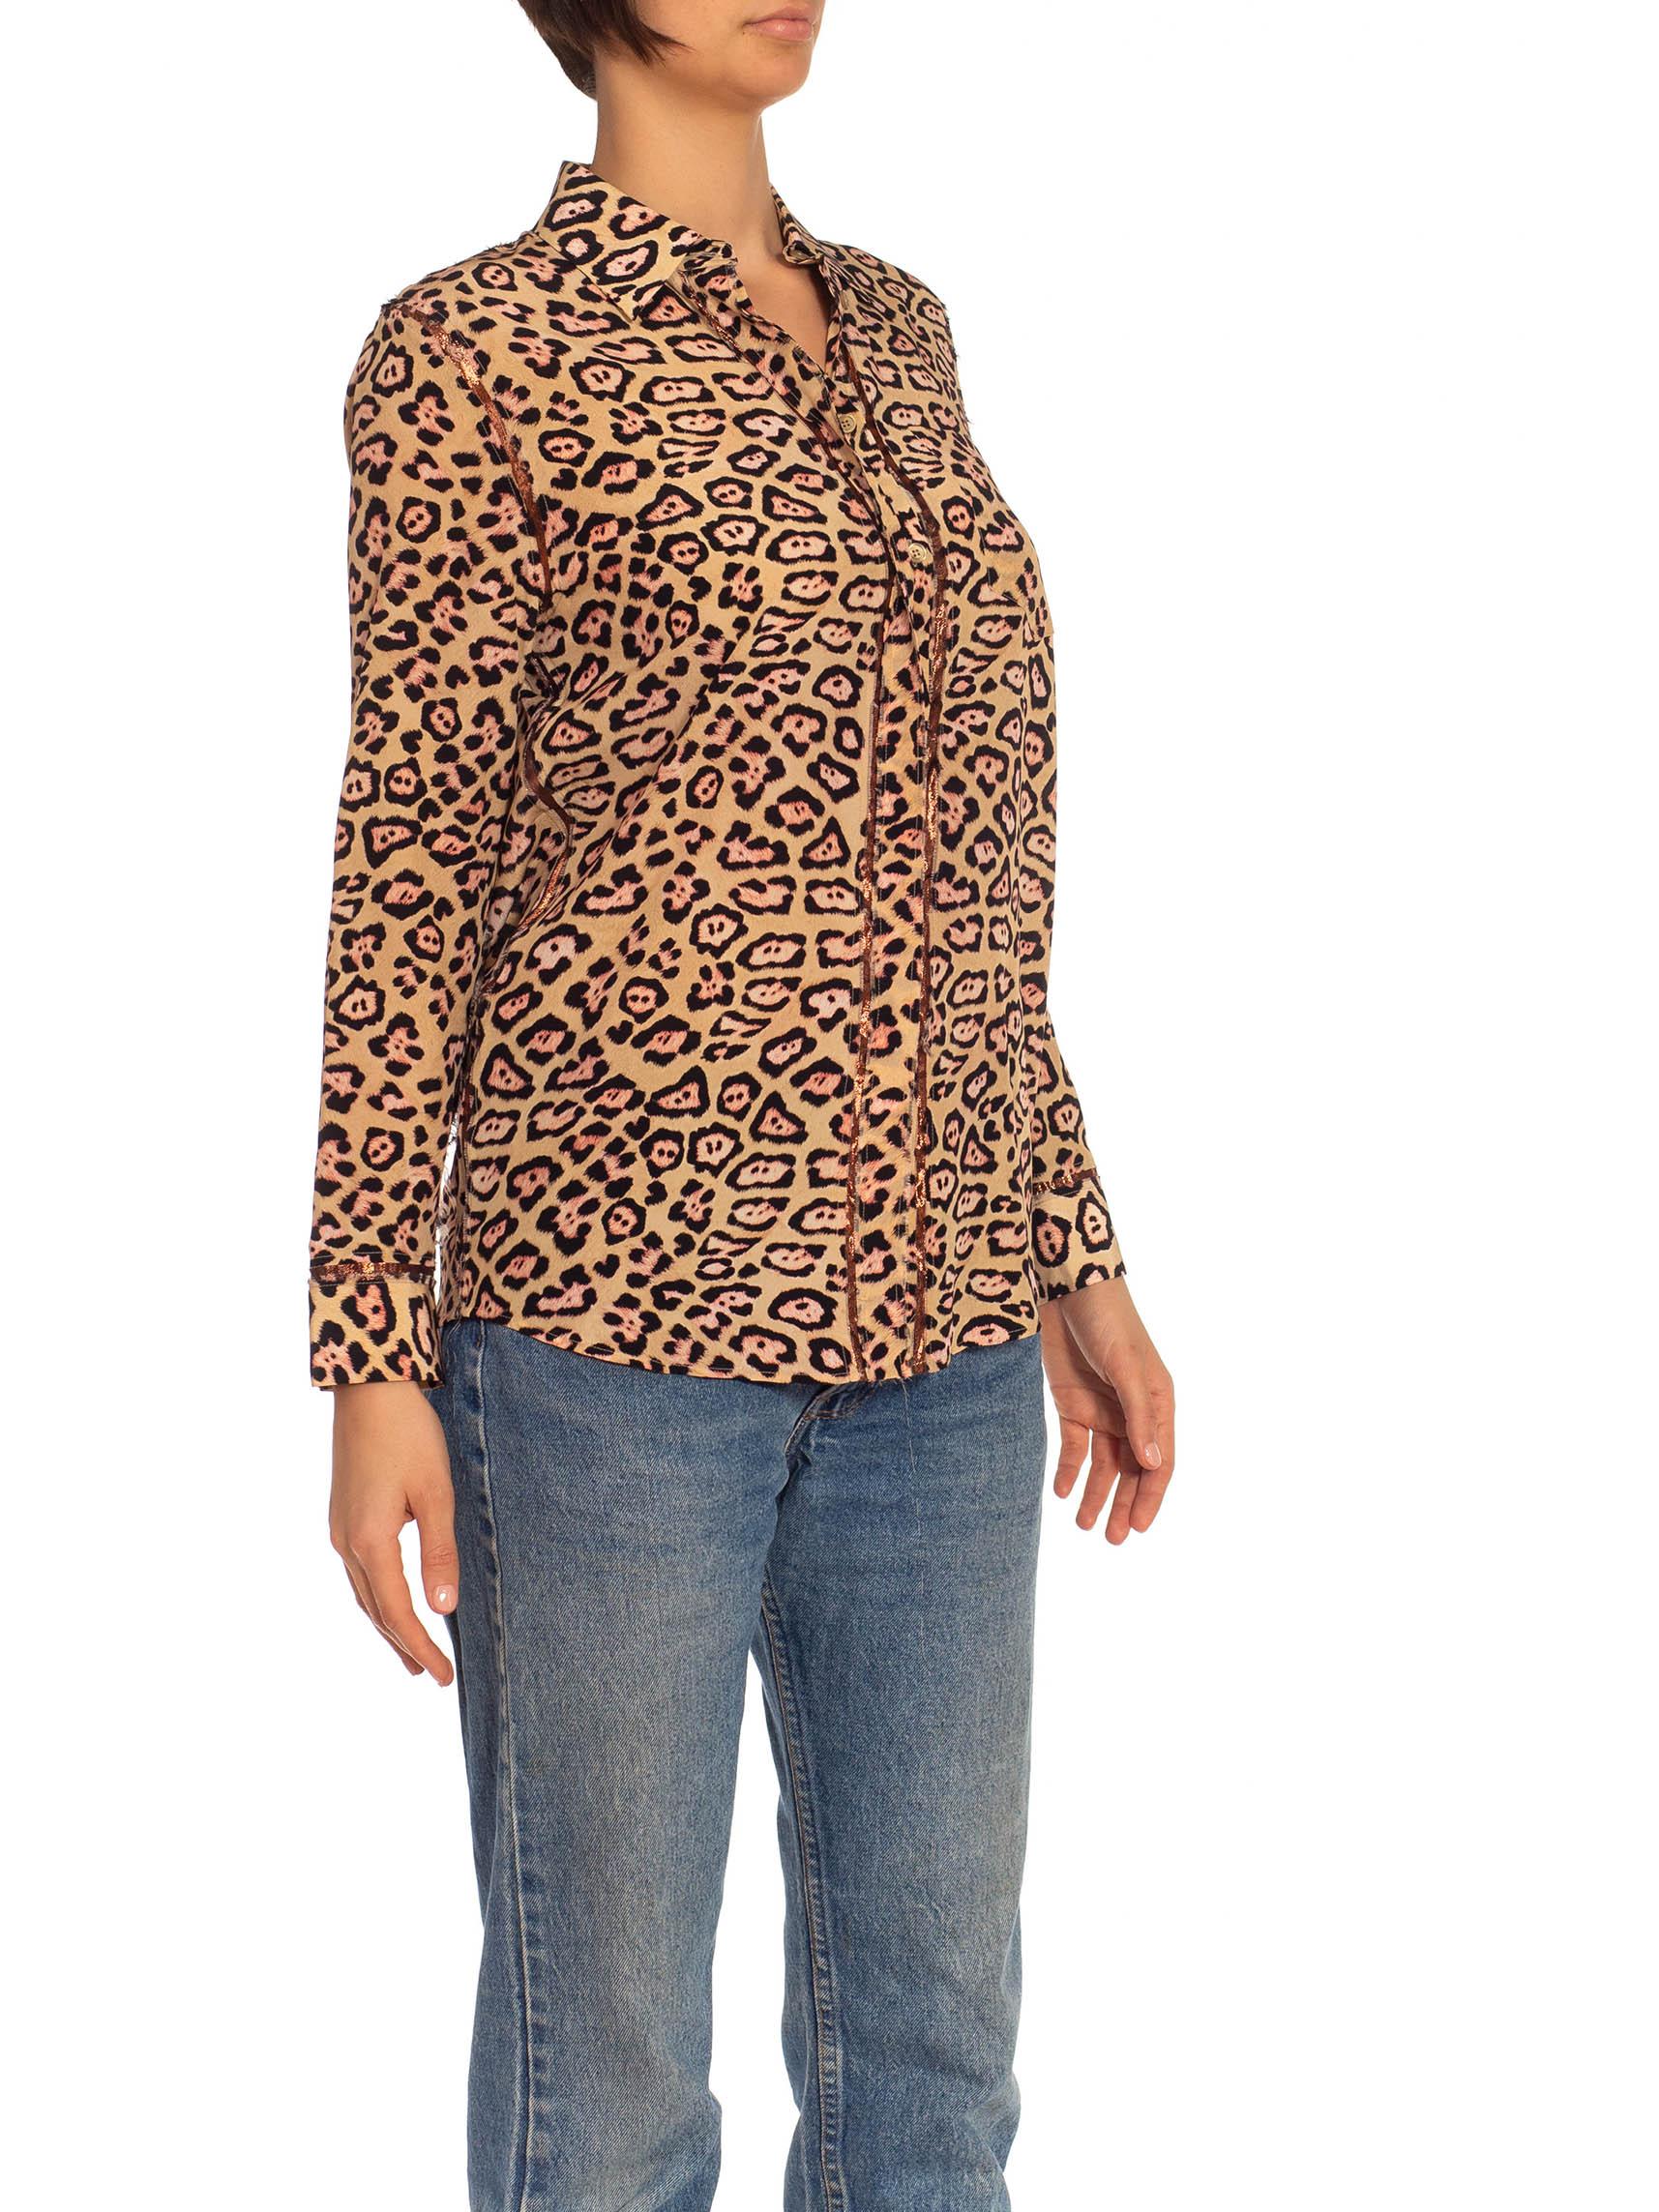 2010S GIVENCHY Leopard Print Tan & Brown Silk With Metallic Trimmings Shirt For Sale 5